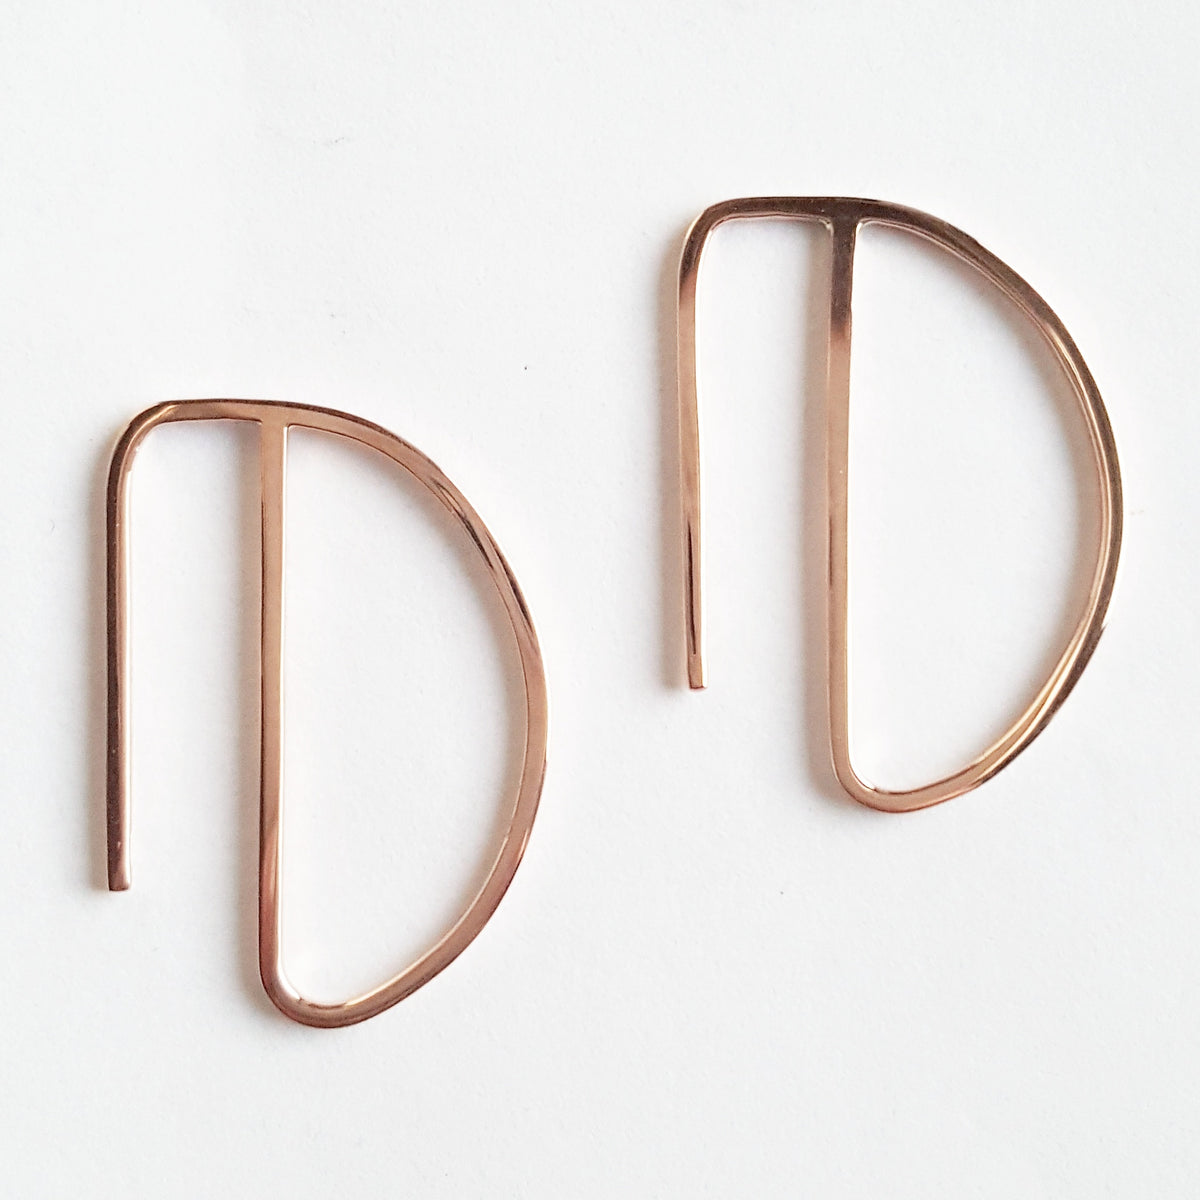 A stunning pair of Solid Gold Hoop Earrings with a unique design, placed on a white background.